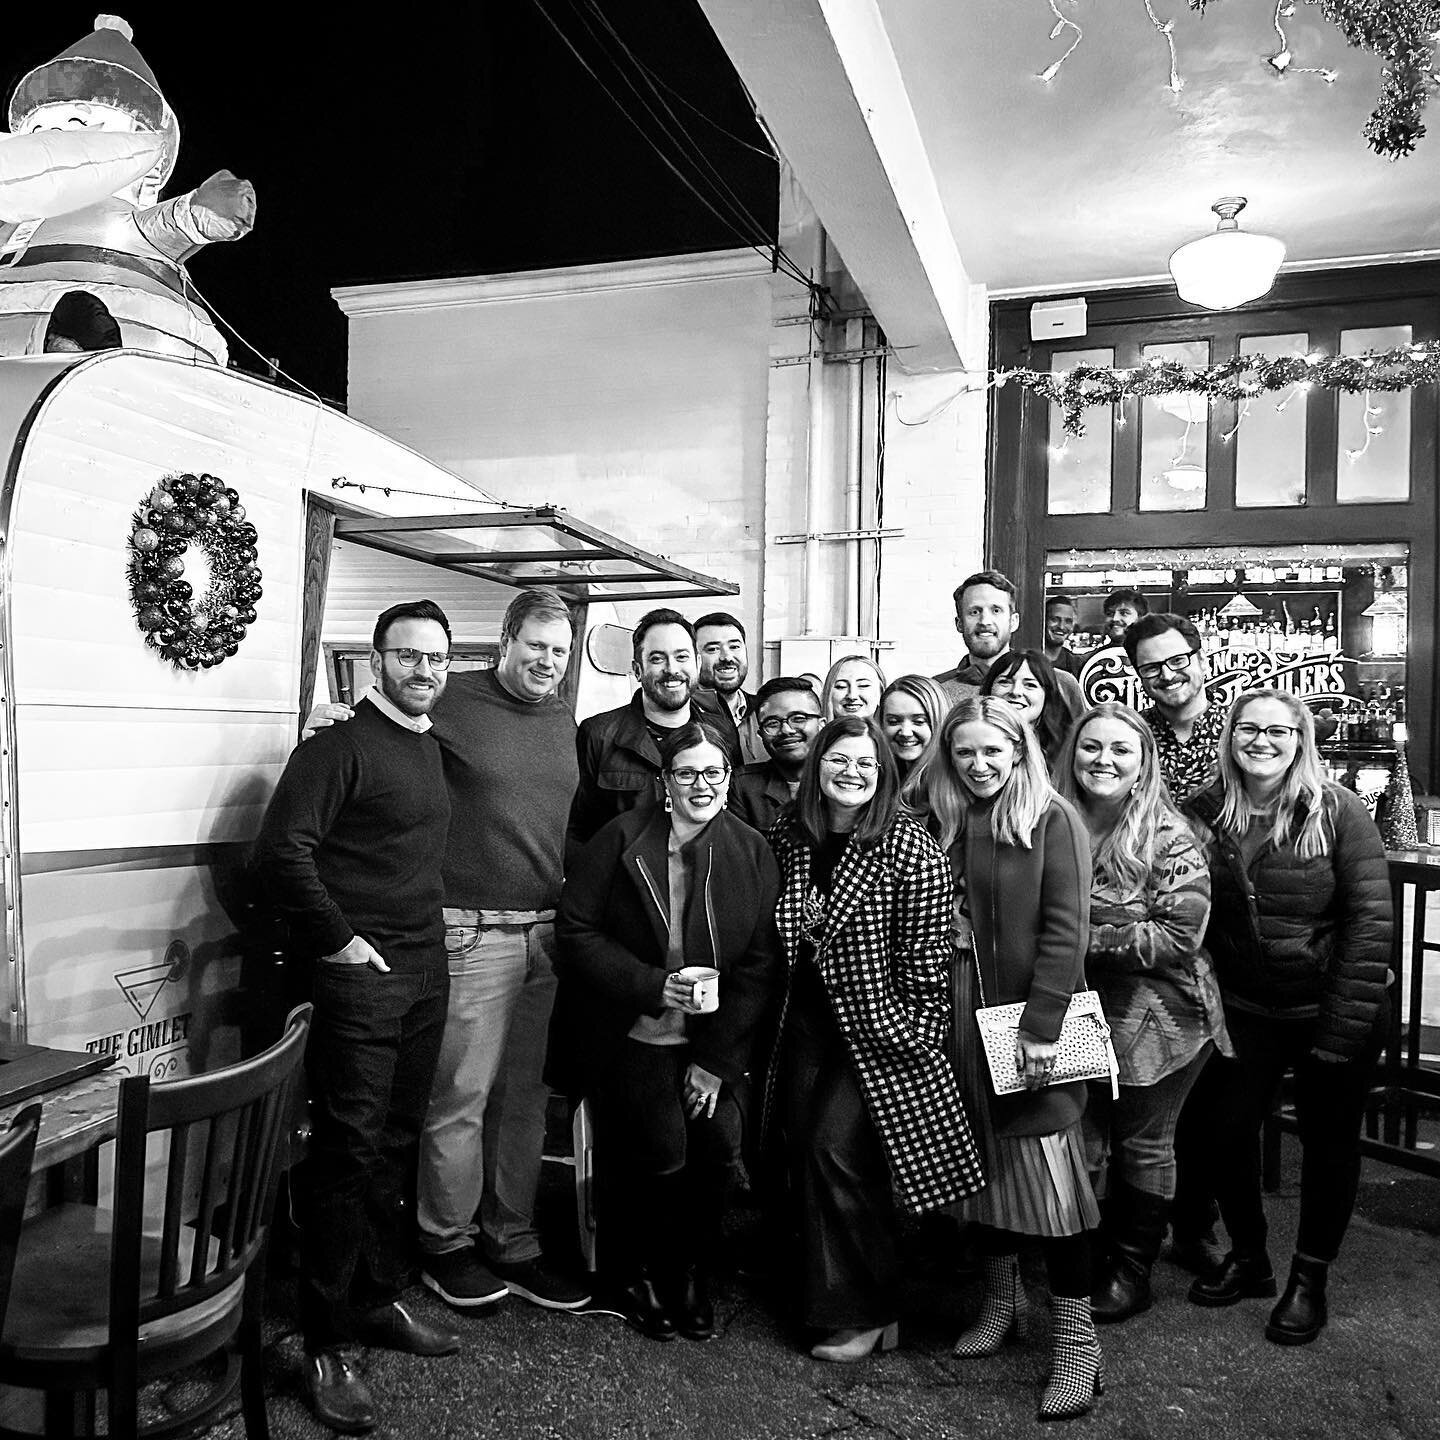 Ushering in a new chapter of @nimbledesignco. Eight years young and a new year of exploring on tap.

Last night we celebrated year eight by revealing @burooffthesquare to our Nimble. extended fam and exploring @mariettasquare (thanks for the hospital